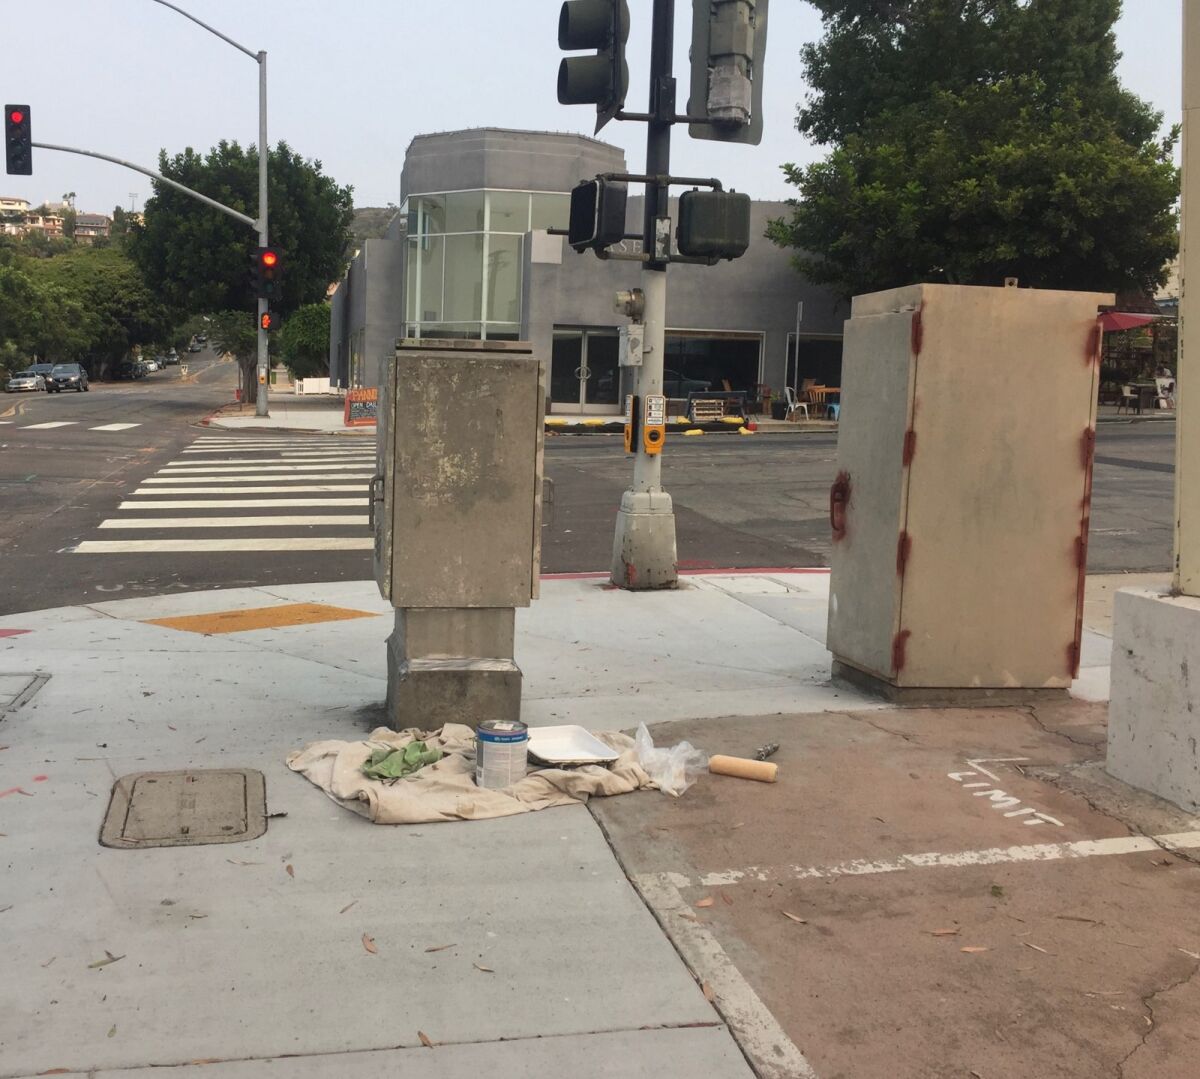 Utility boxes at Pearl Street and Girard Avenue are shown before a paint job by Enhance La Jolla.